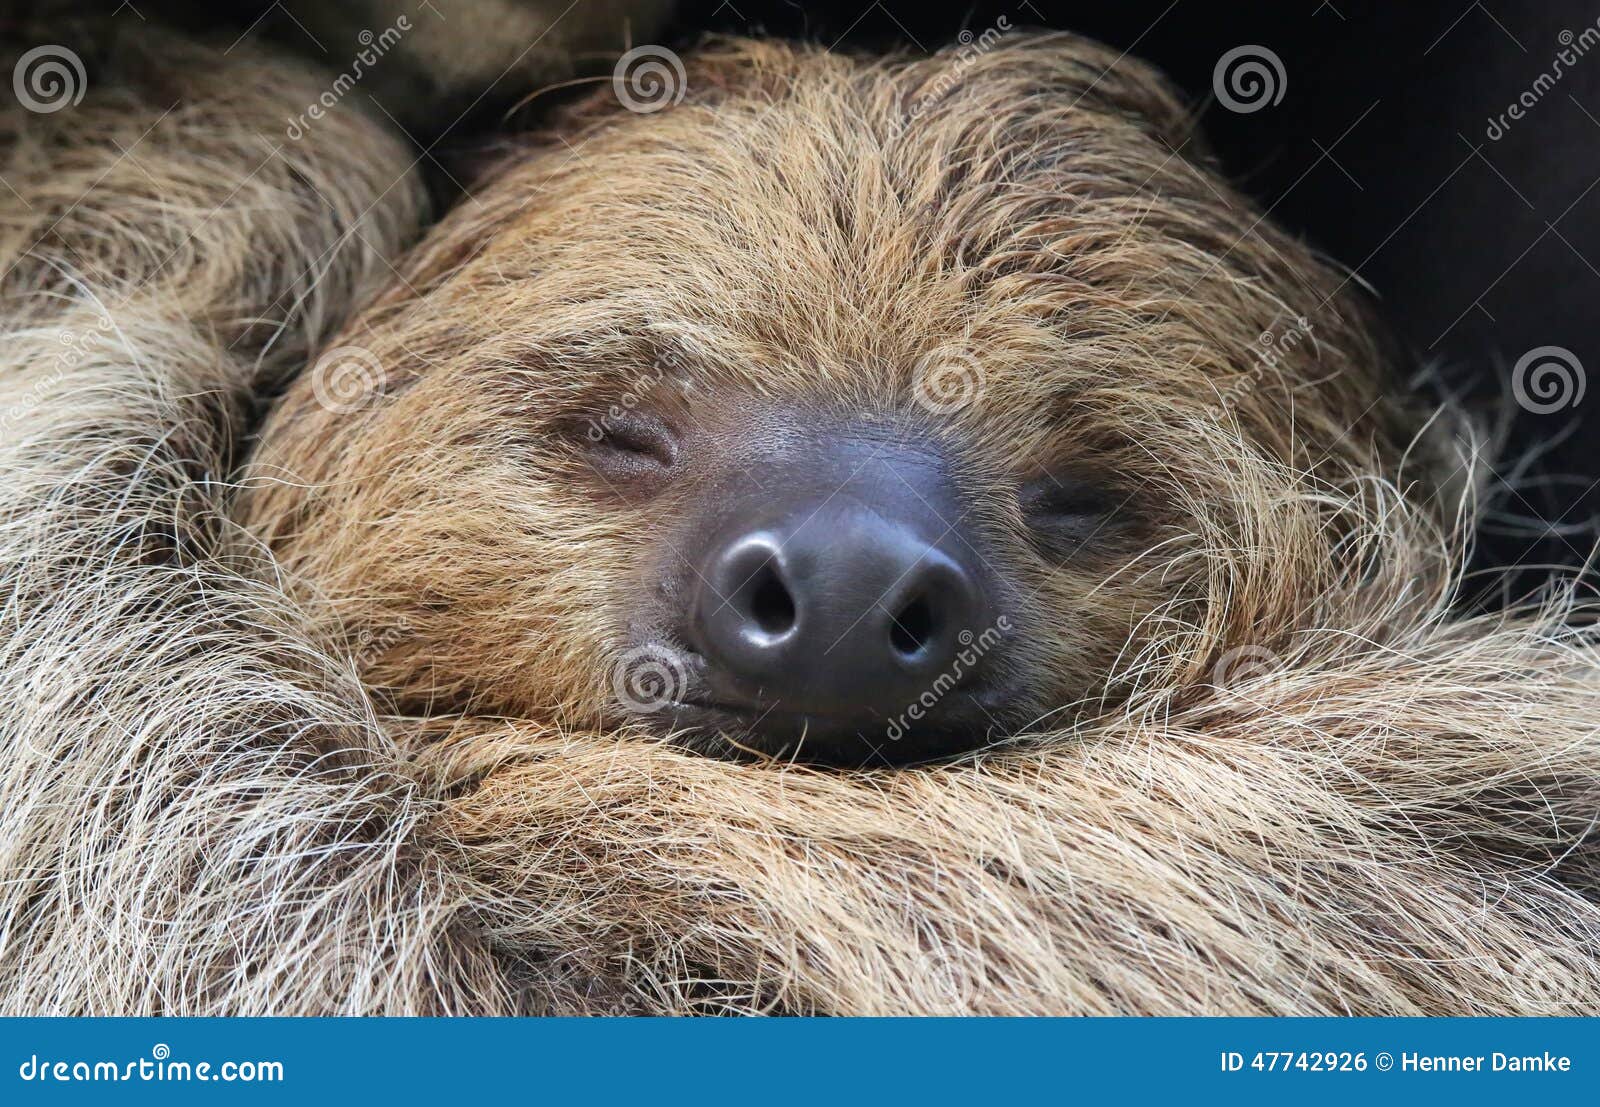 close-up view of a two-toed sloth